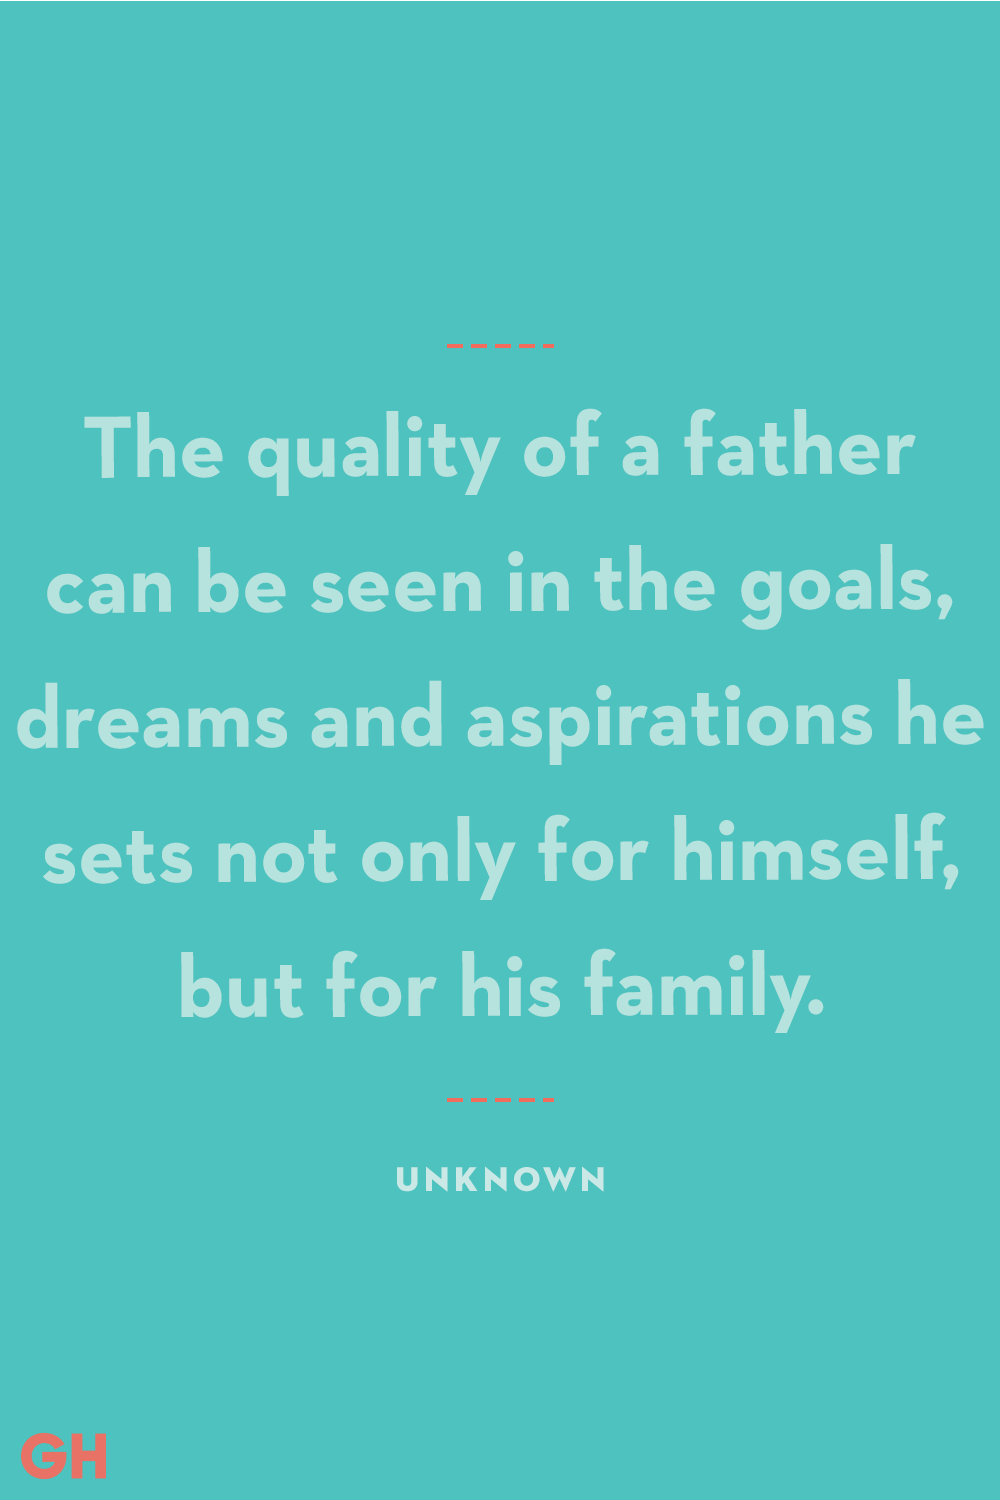 father son quotes unknown 5 64483c074c283